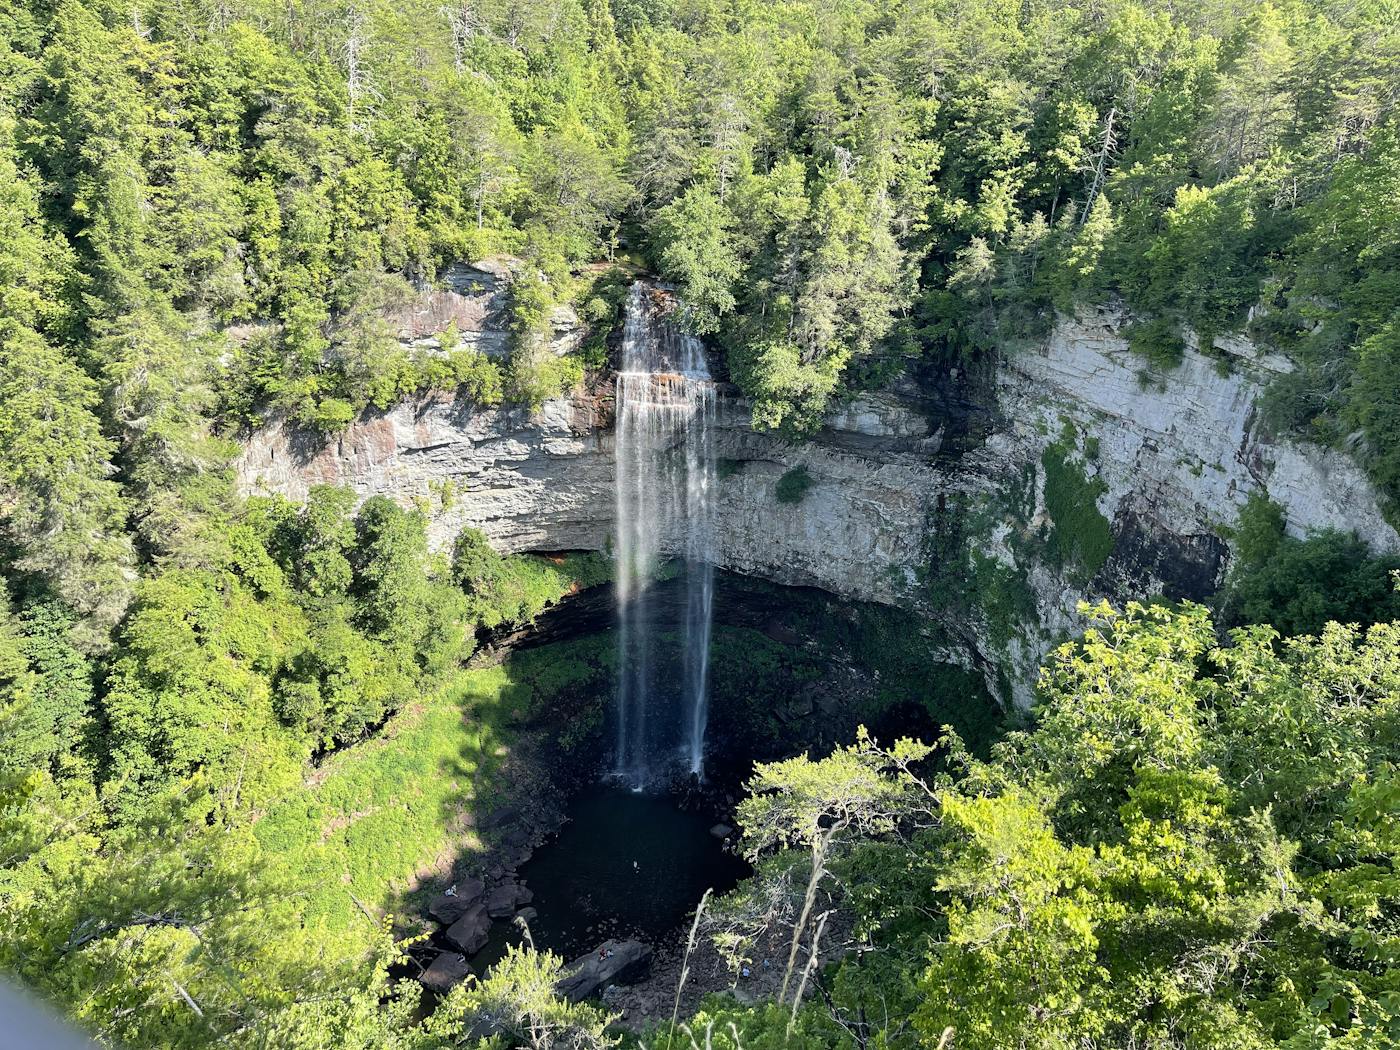 Cane Creek Falls at Fall Creek Falls State Park in Spencer, Tennessee (photo courtesy of Tennessee State Parks))